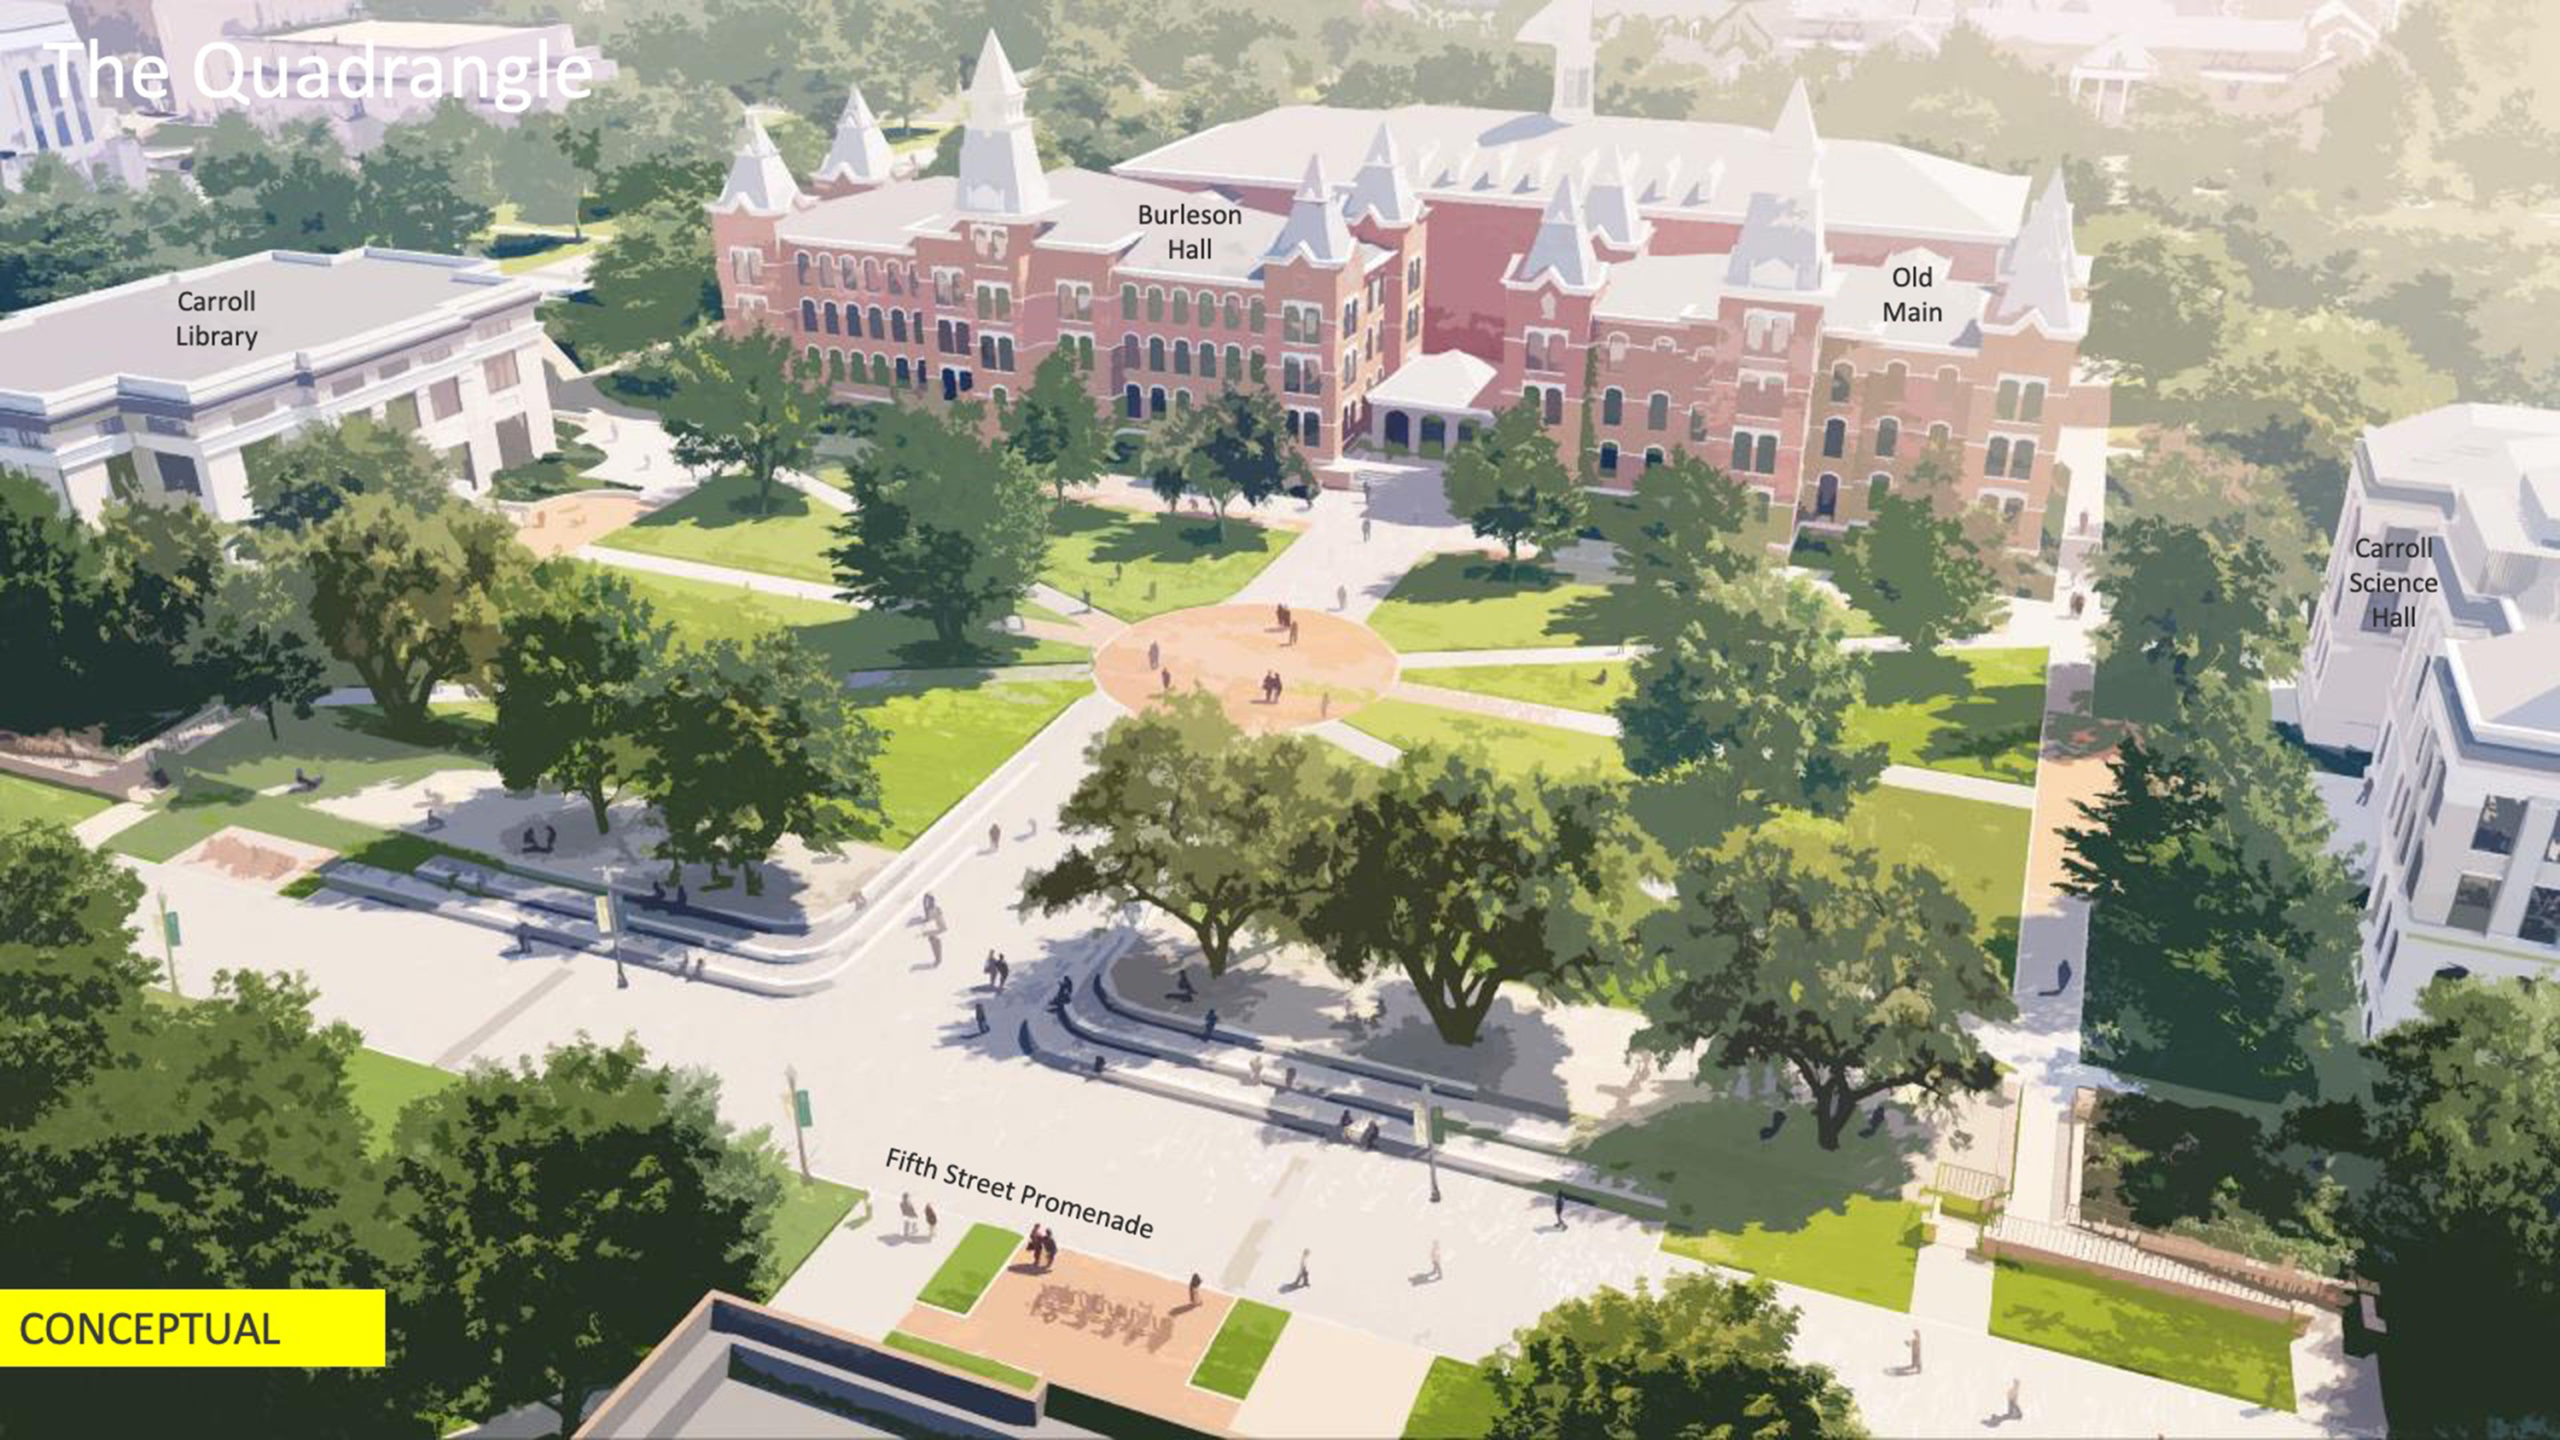 Conceptual rendering of updates planned for the Quadrangle